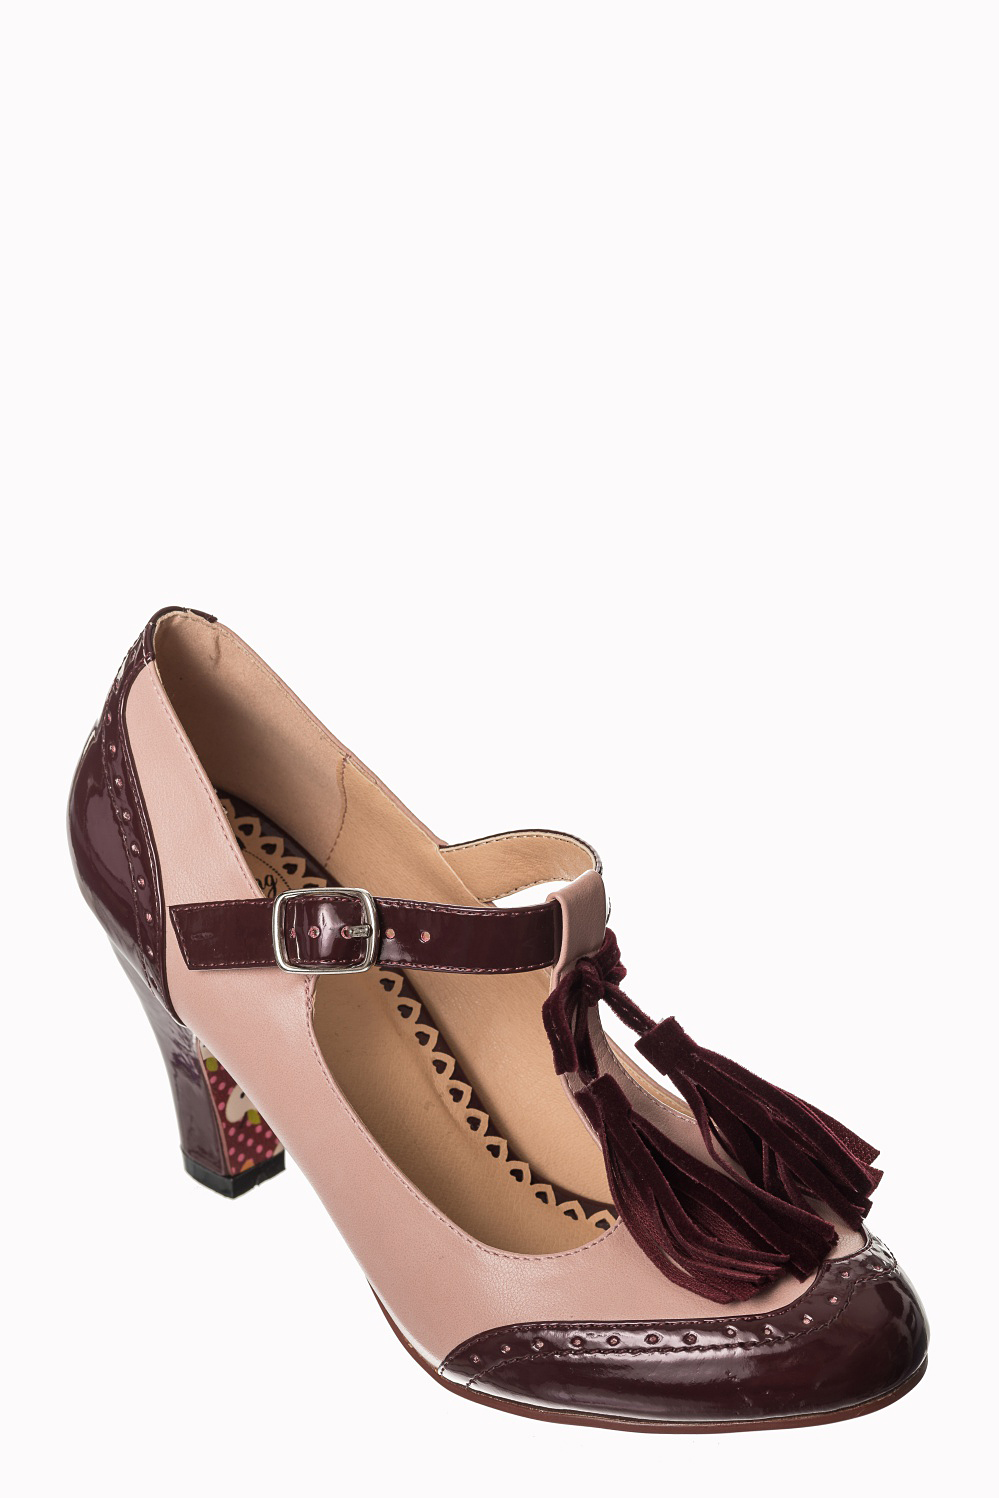 Dancing Days Baby Loves That Way 60s Burgundy Brogue Shoes